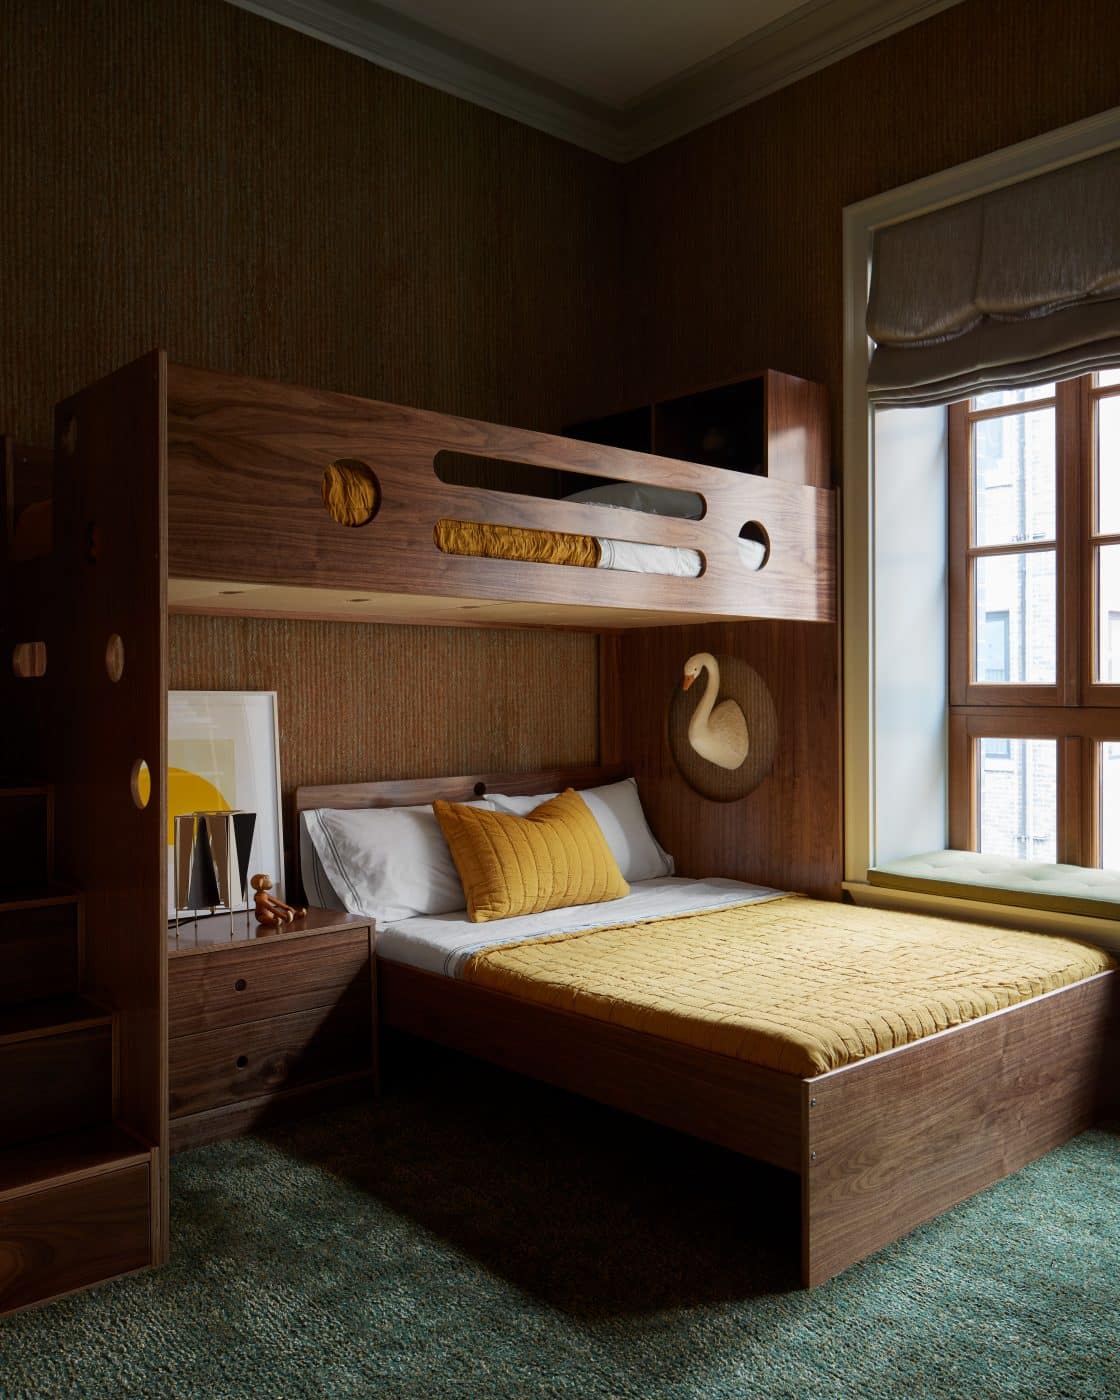 Childrens' bedroom bunk beds of apartment in Fitzroy building in New York City by interior designer Shawn Henderson